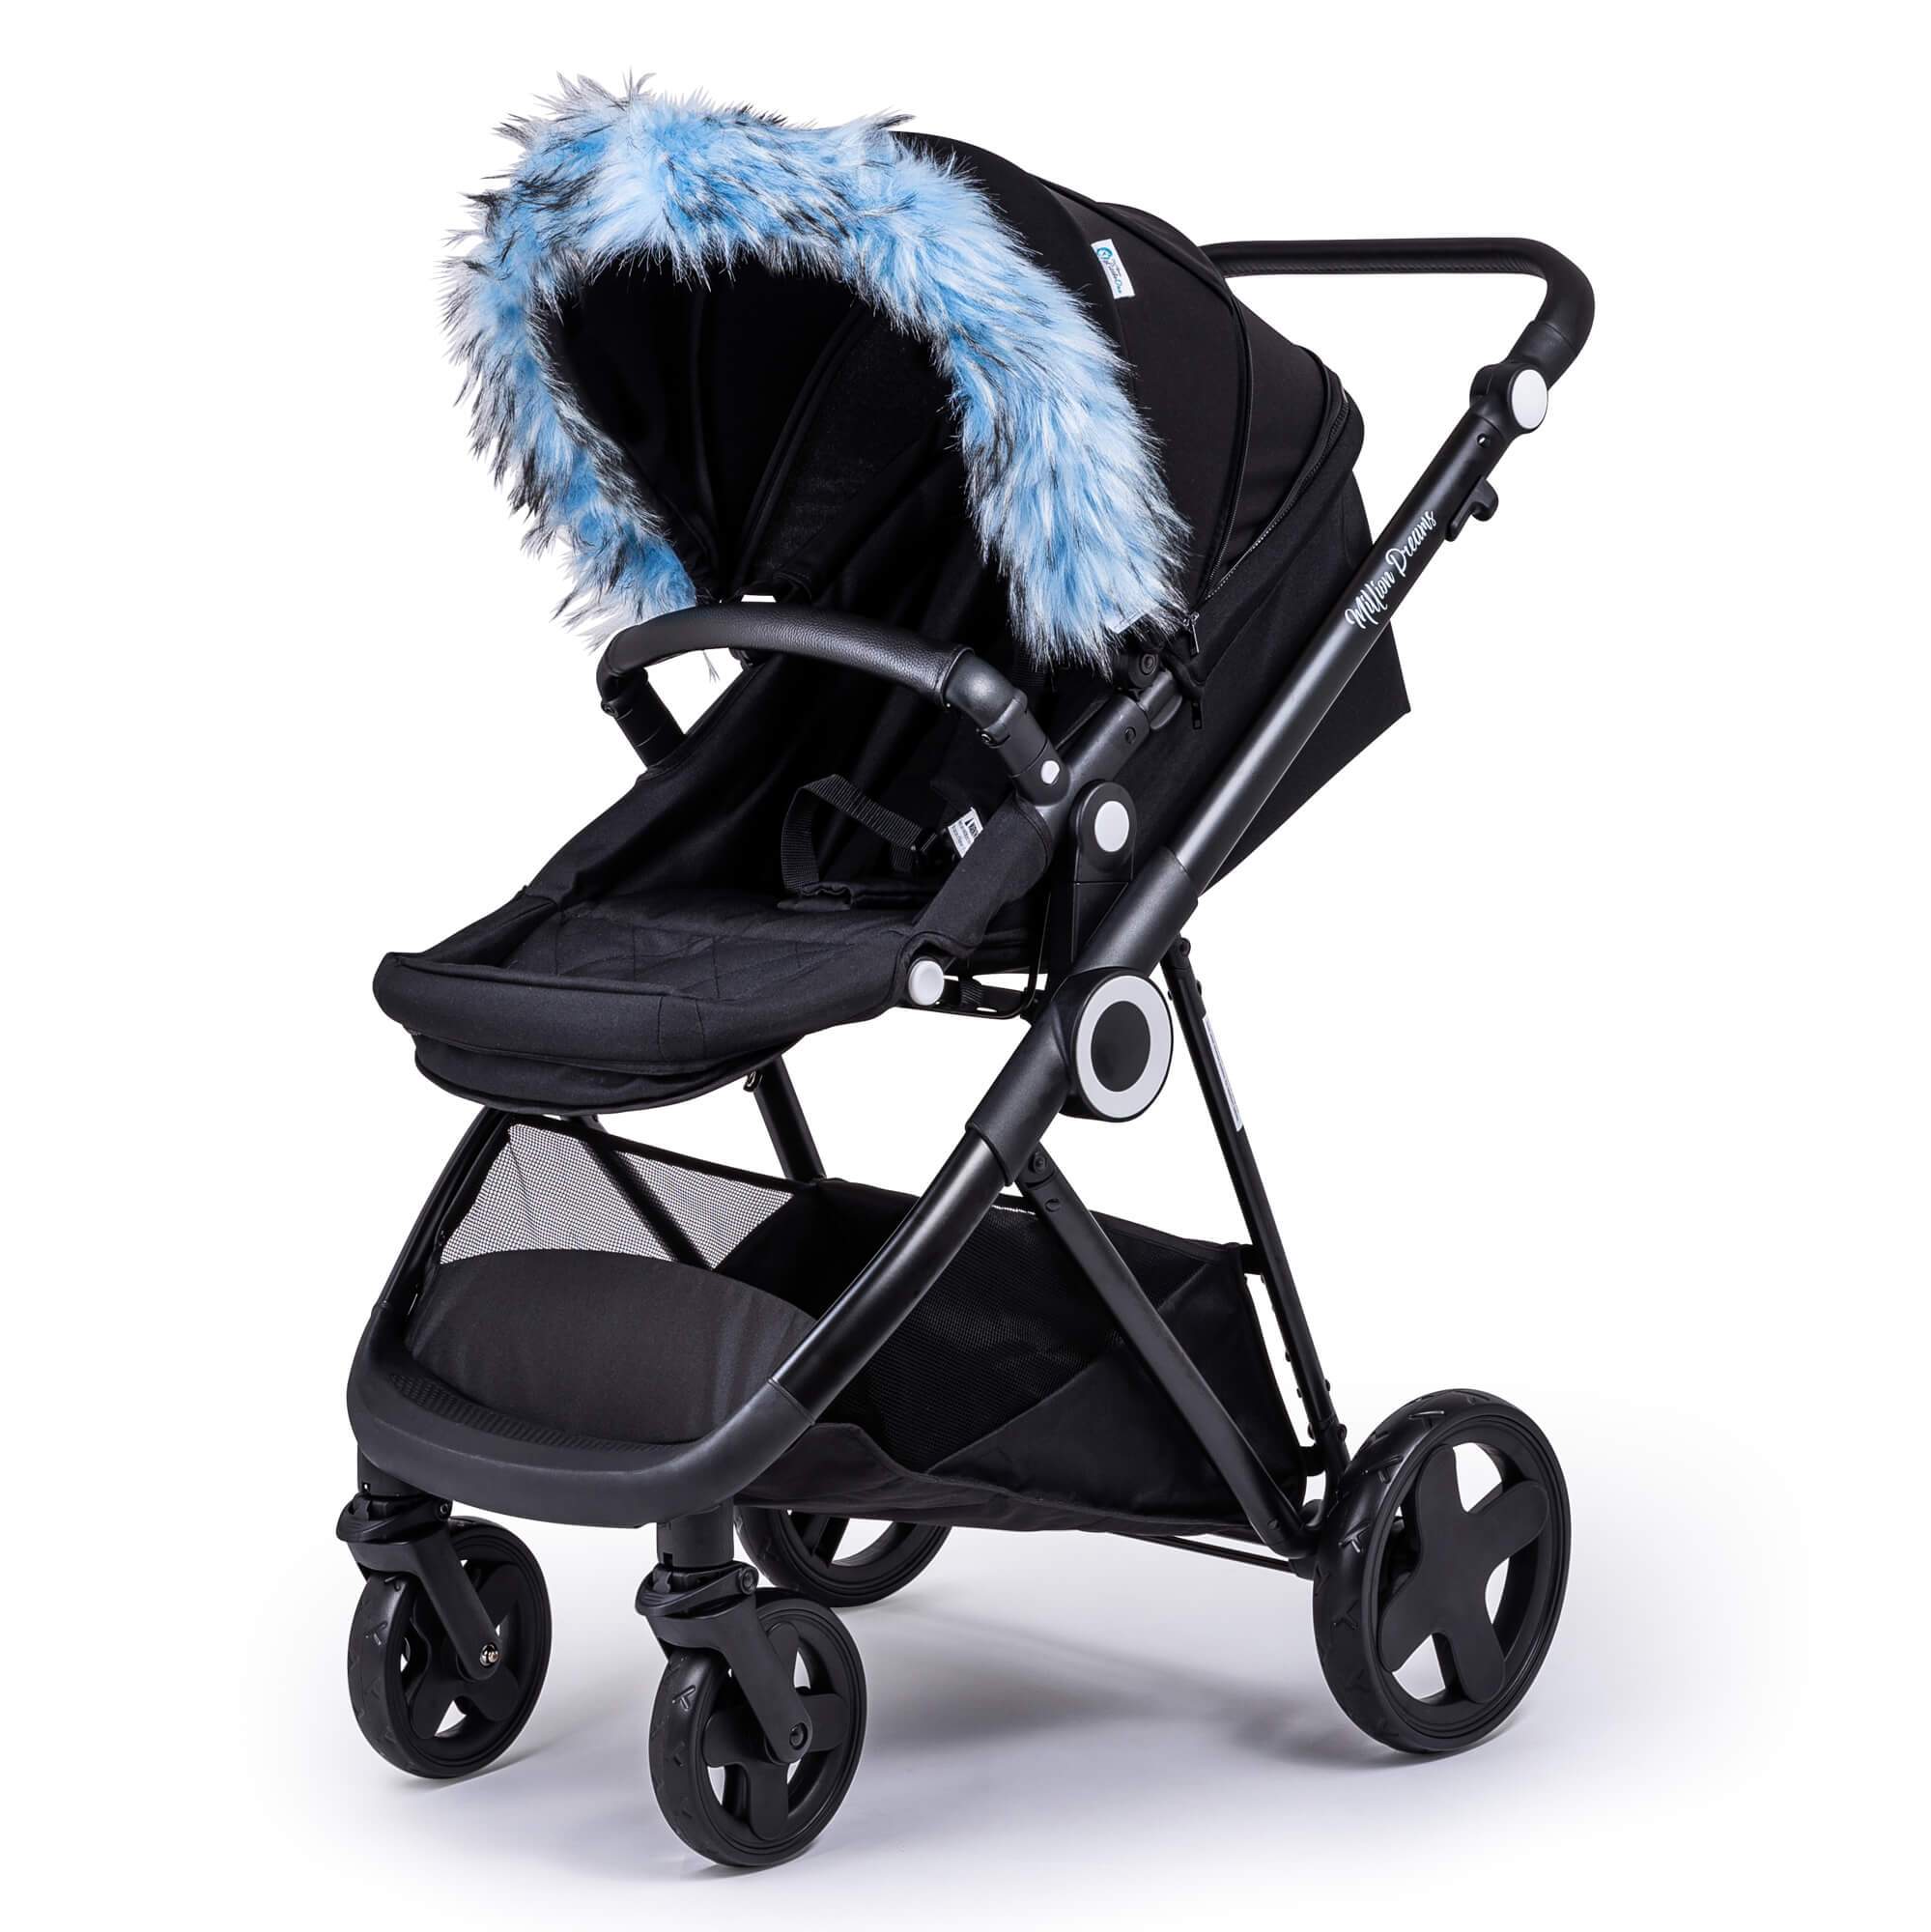 Pram Fur Hood Trim Attachment For Pushchair Compatible with Diono - Light Blue / Fits All Models | For Your Little One